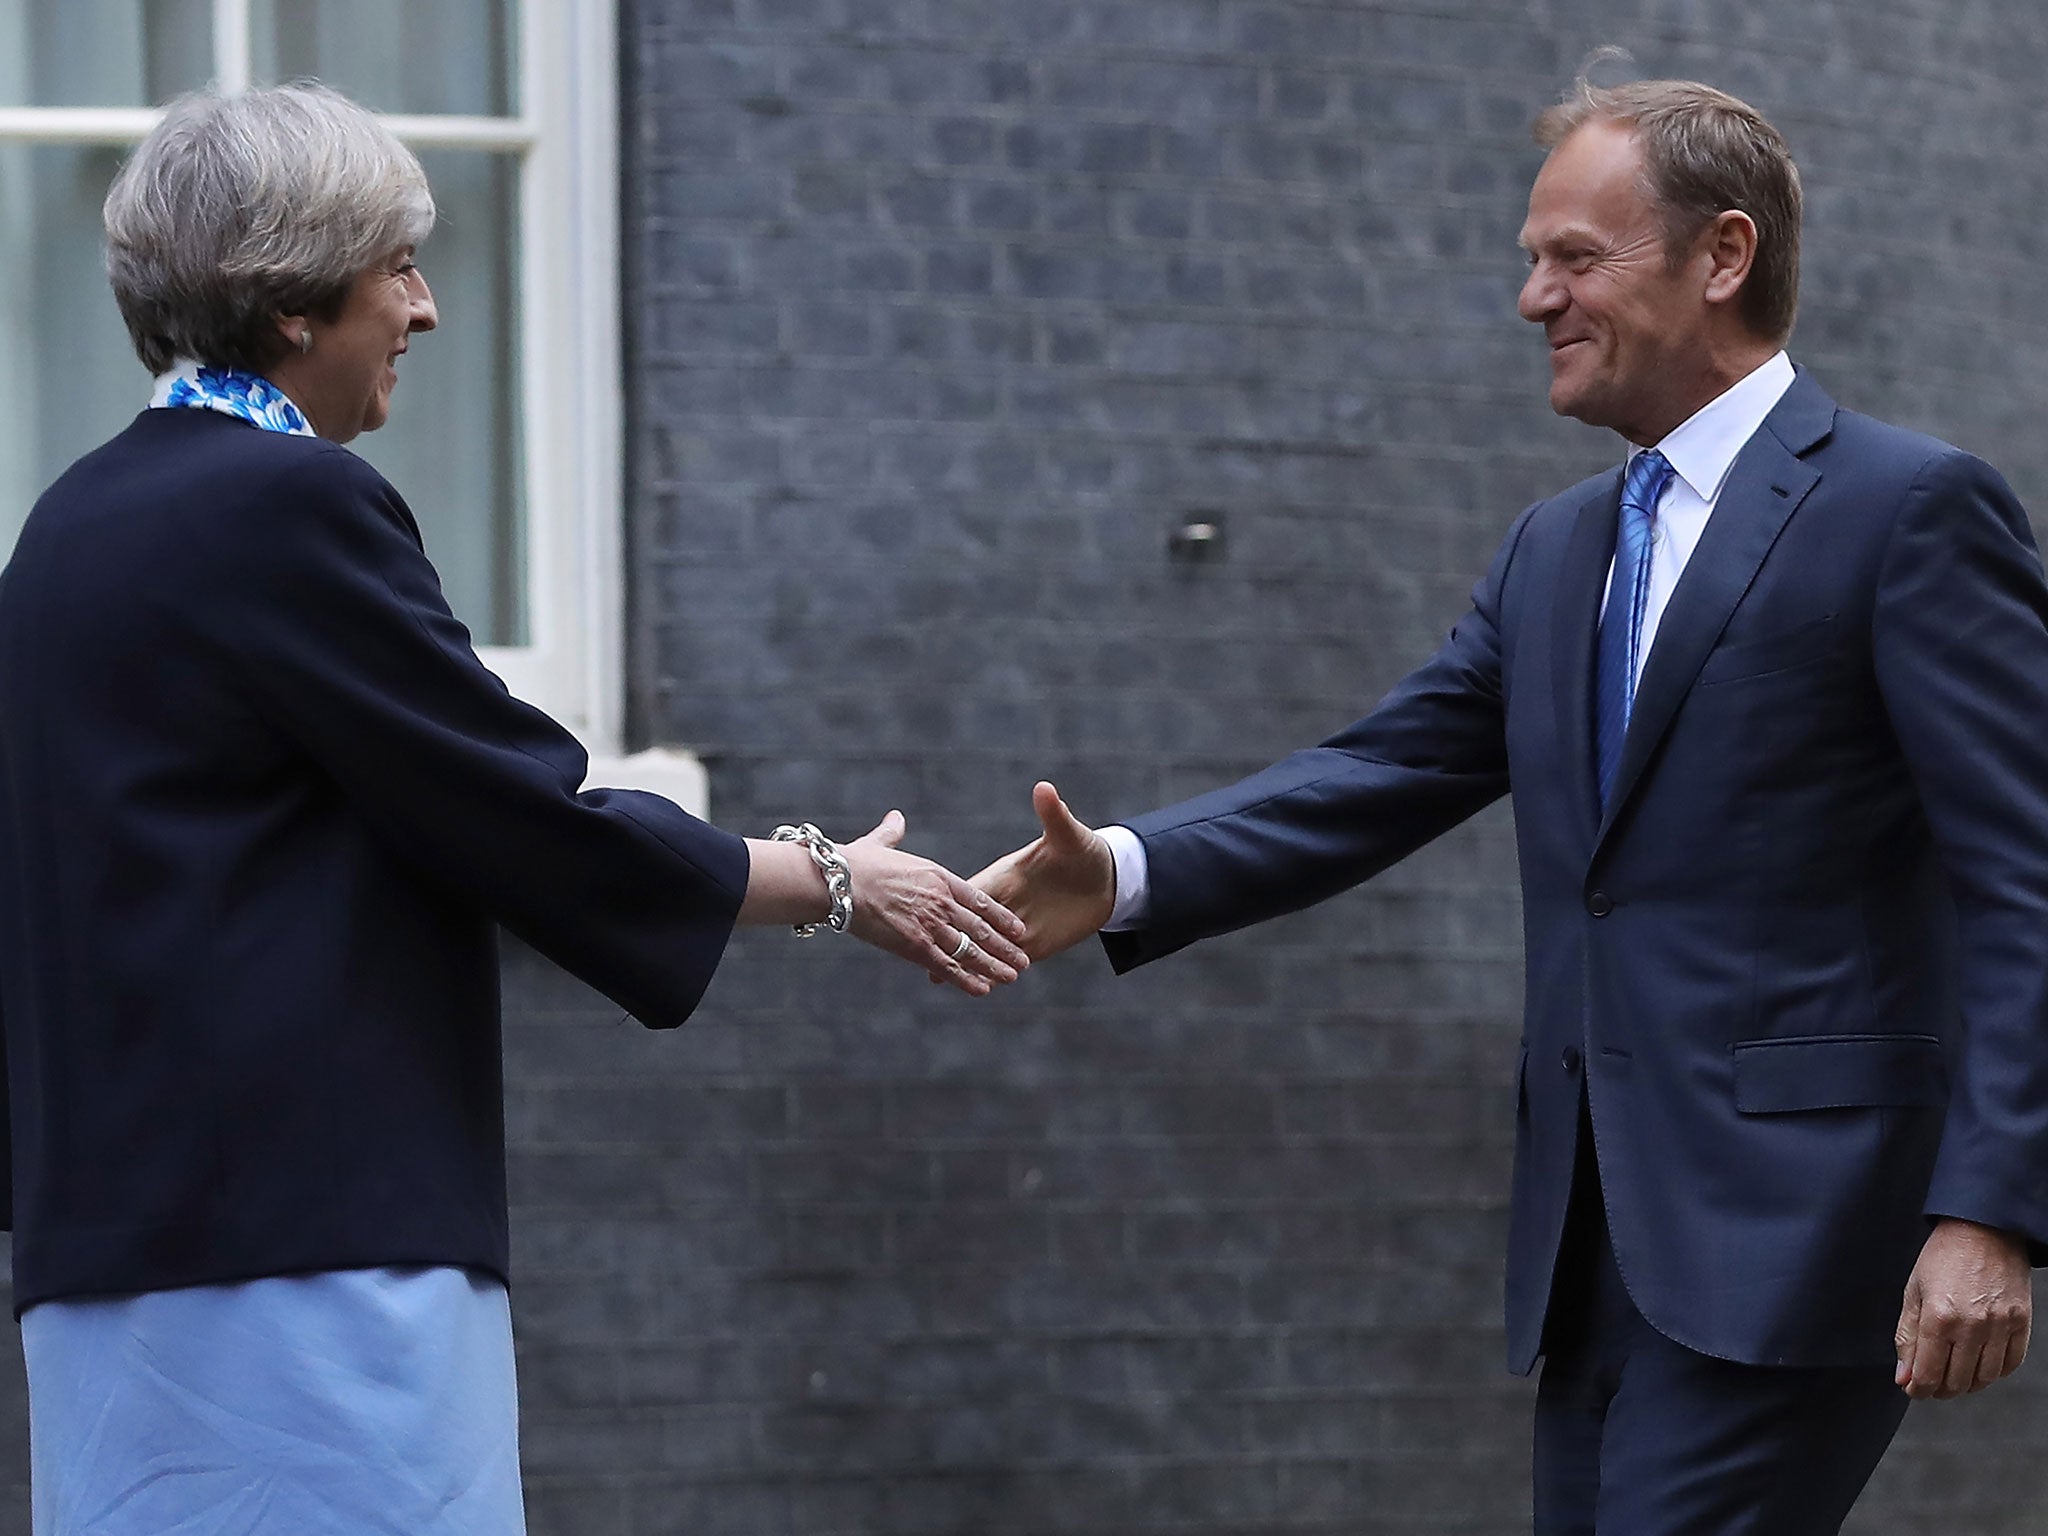 Donald Tusk is in charge of overseeing the Brexit talks